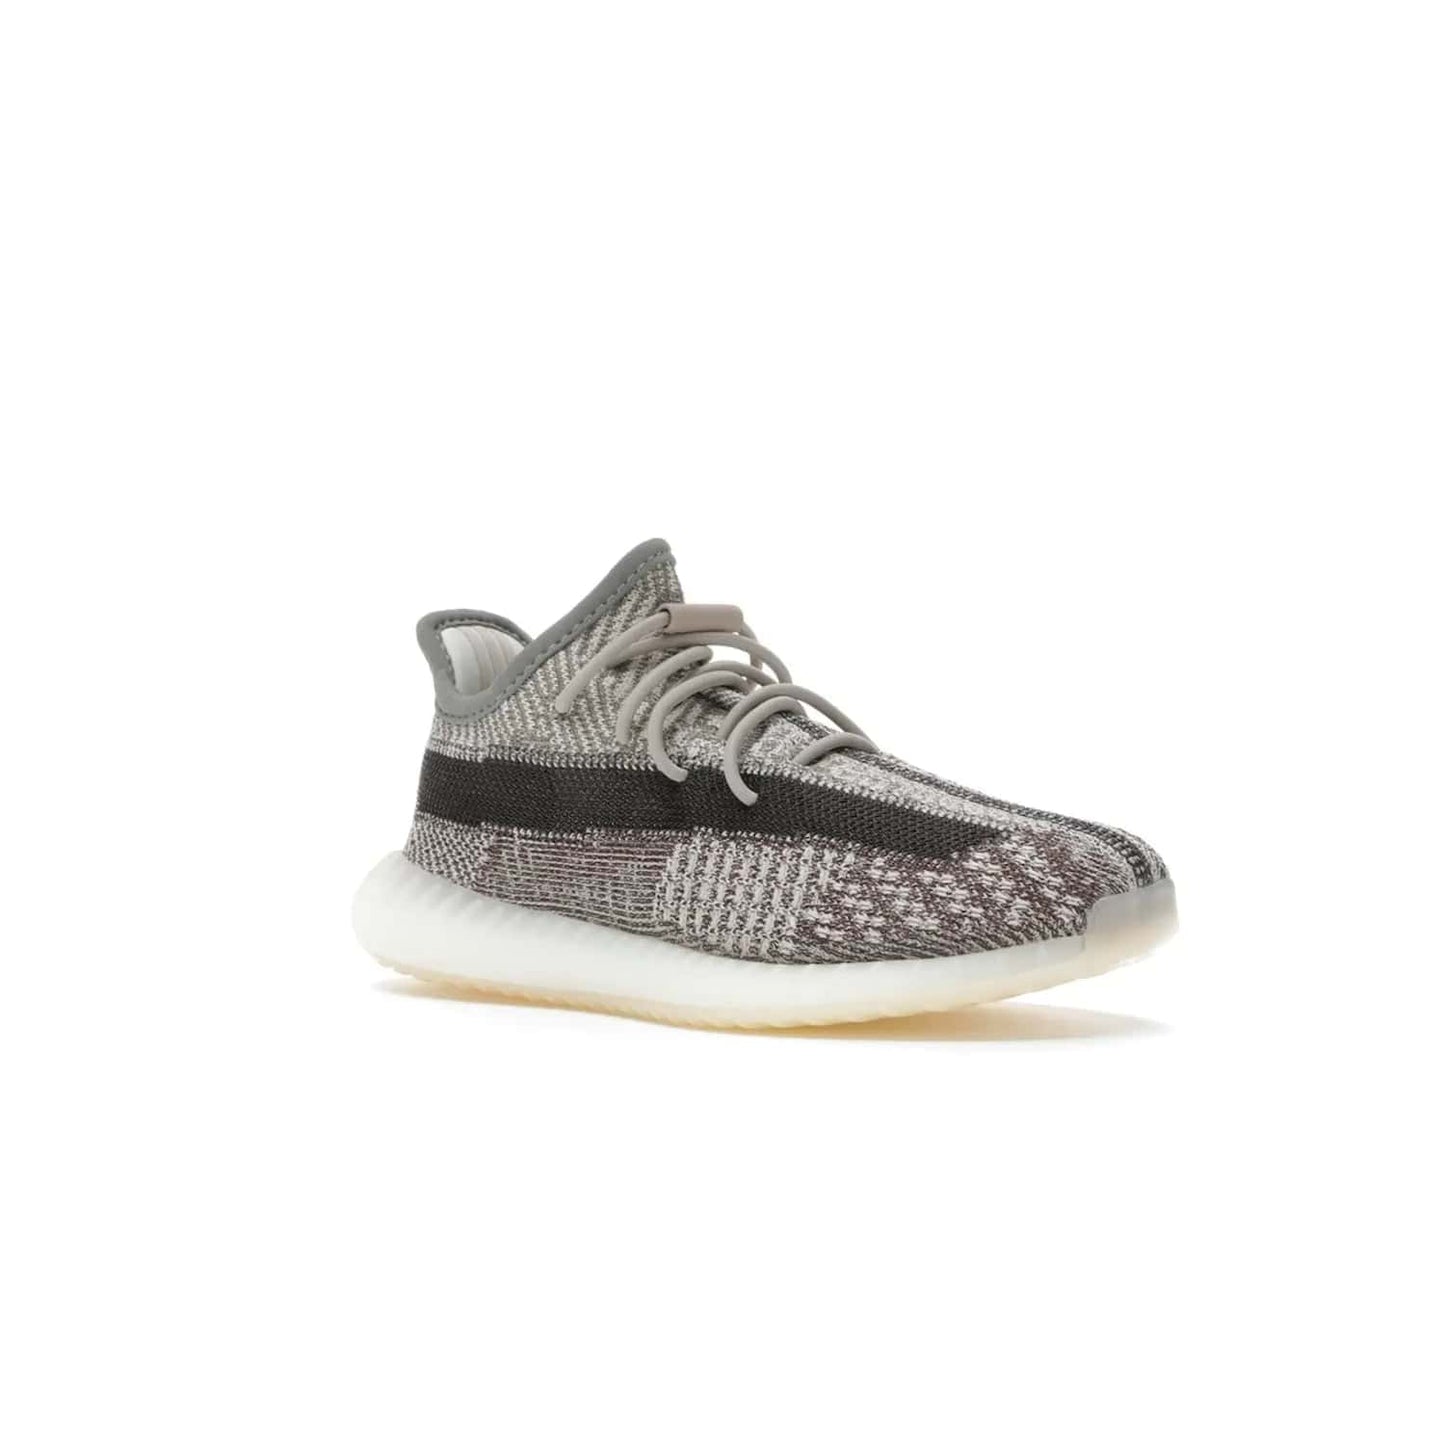 adidas Yeezy Boost 350 V2 Zyon (Kids) - Image 5 - Only at www.BallersClubKickz.com - The adidas Yeezy Boost 350 V2 Zyon (Kids) - perfect pick for fashion-savvy kids. Features soft Primeknit upper, lace closure & colorful patterning. Comfort & style for kids' summer outfits!